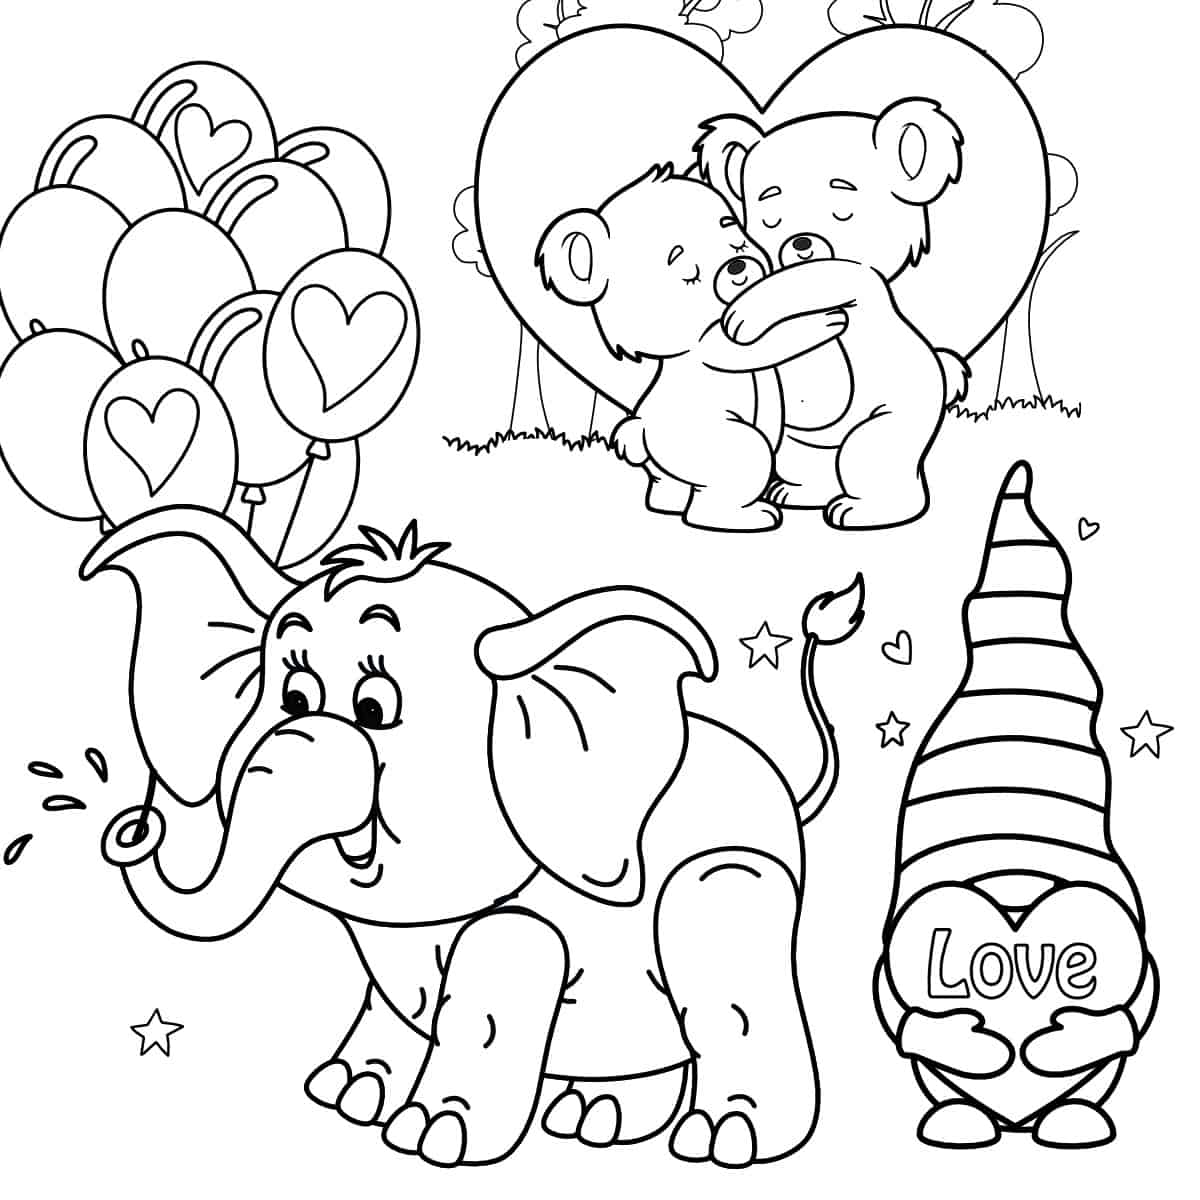 3 images of coloring page characters for valentines day. An elephant with ballons that have hearts, two teddy bears hugging, a gnome holding a heart.